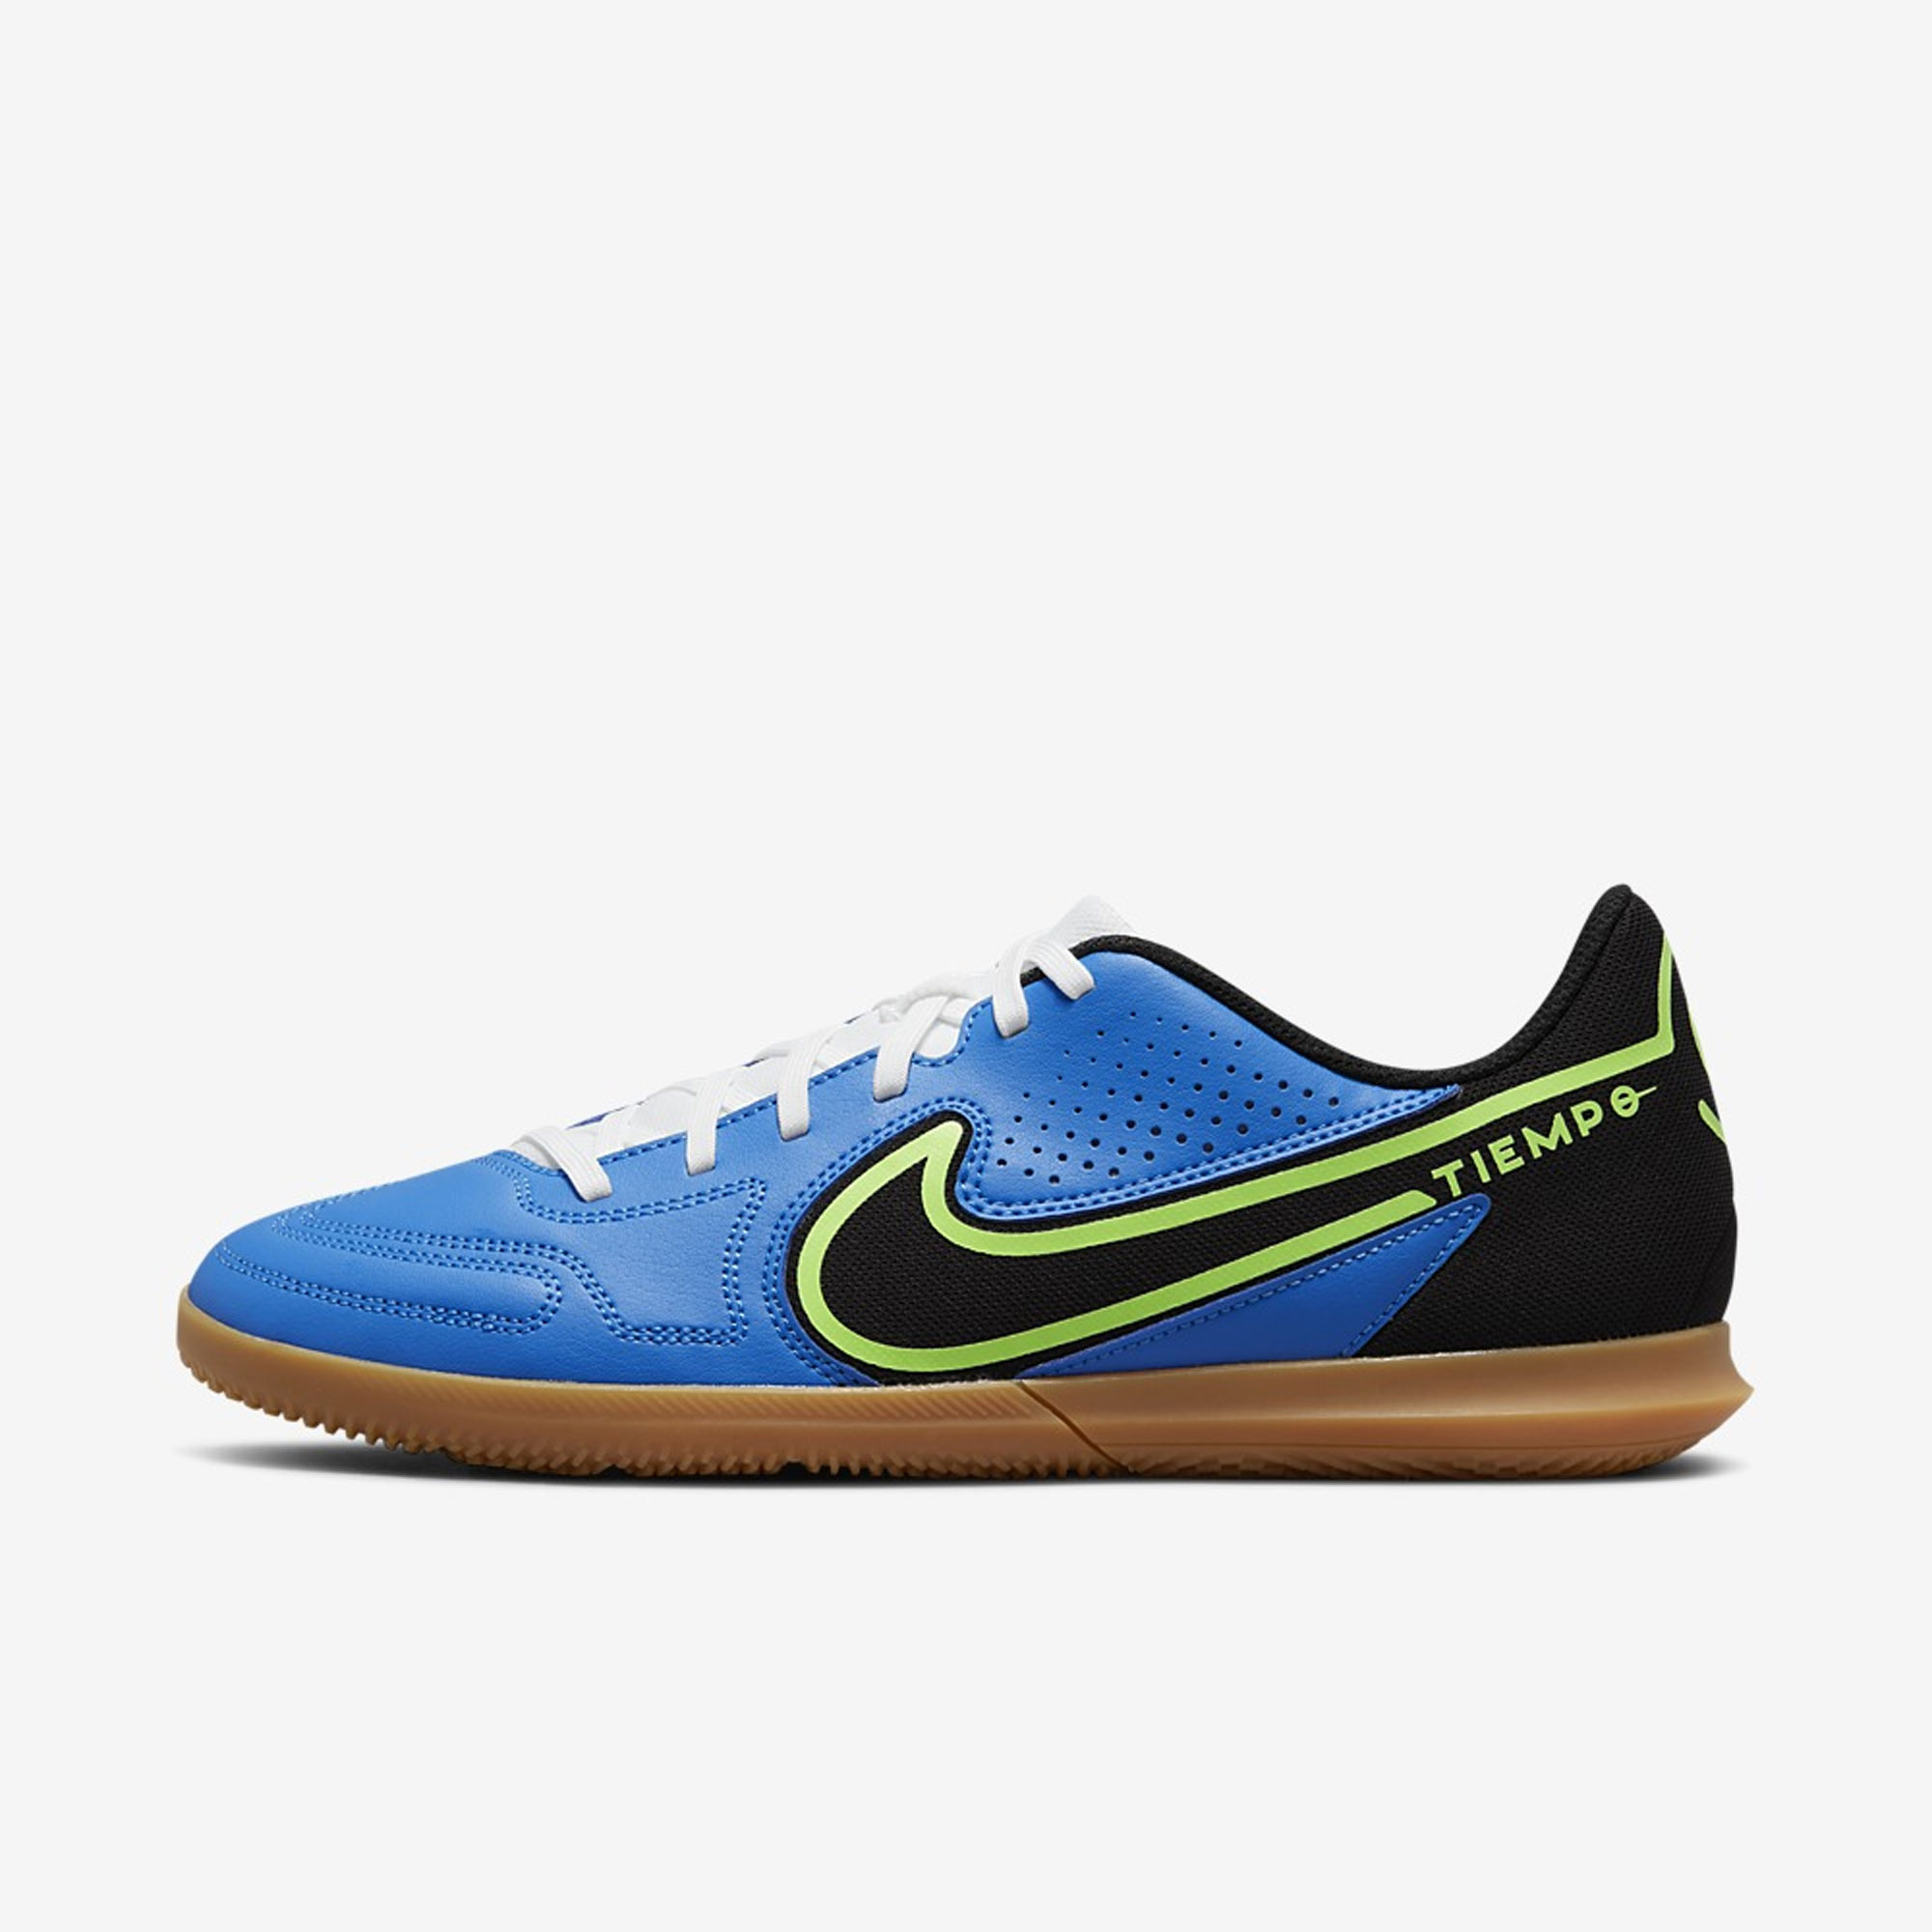 stefanssoccer.com:Nike Tiempo 9 IC Indoor Soccer Shoes - Light Photo / Lime Glow / Gum Medium Brown /